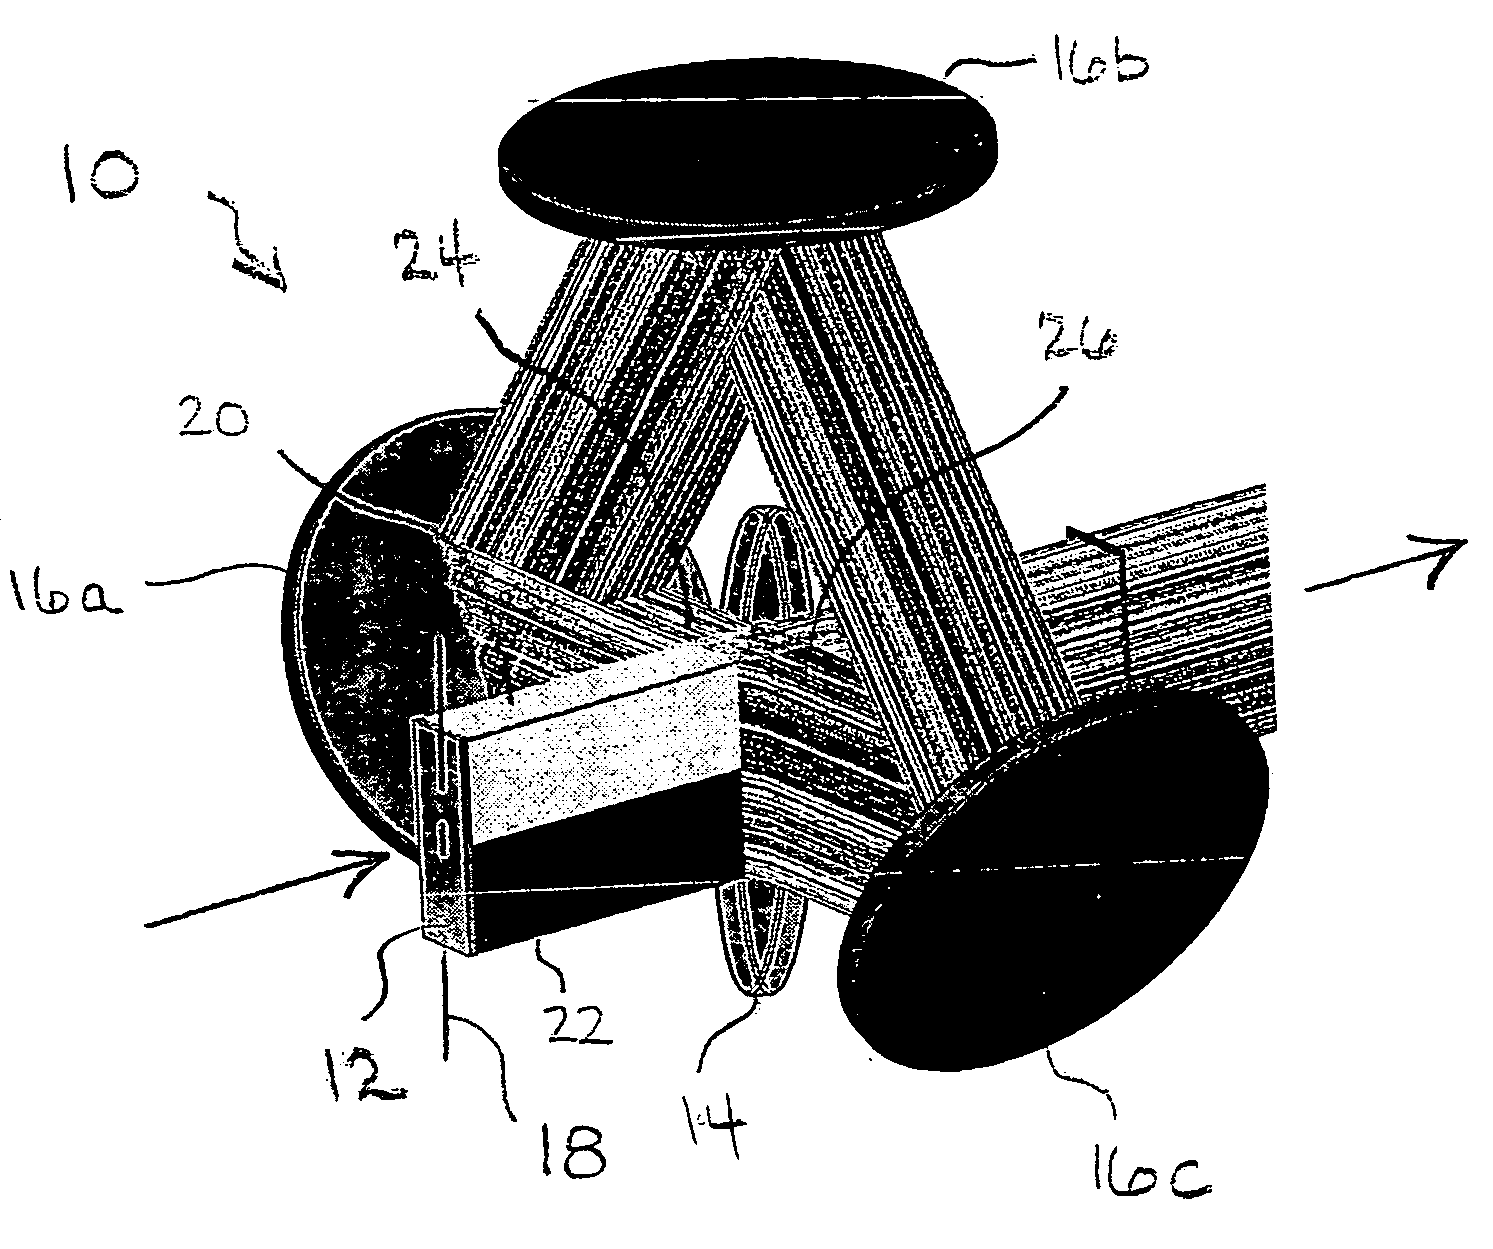 Device and method to stabilize beam shape and symmetry for high energy pulsed laser applications